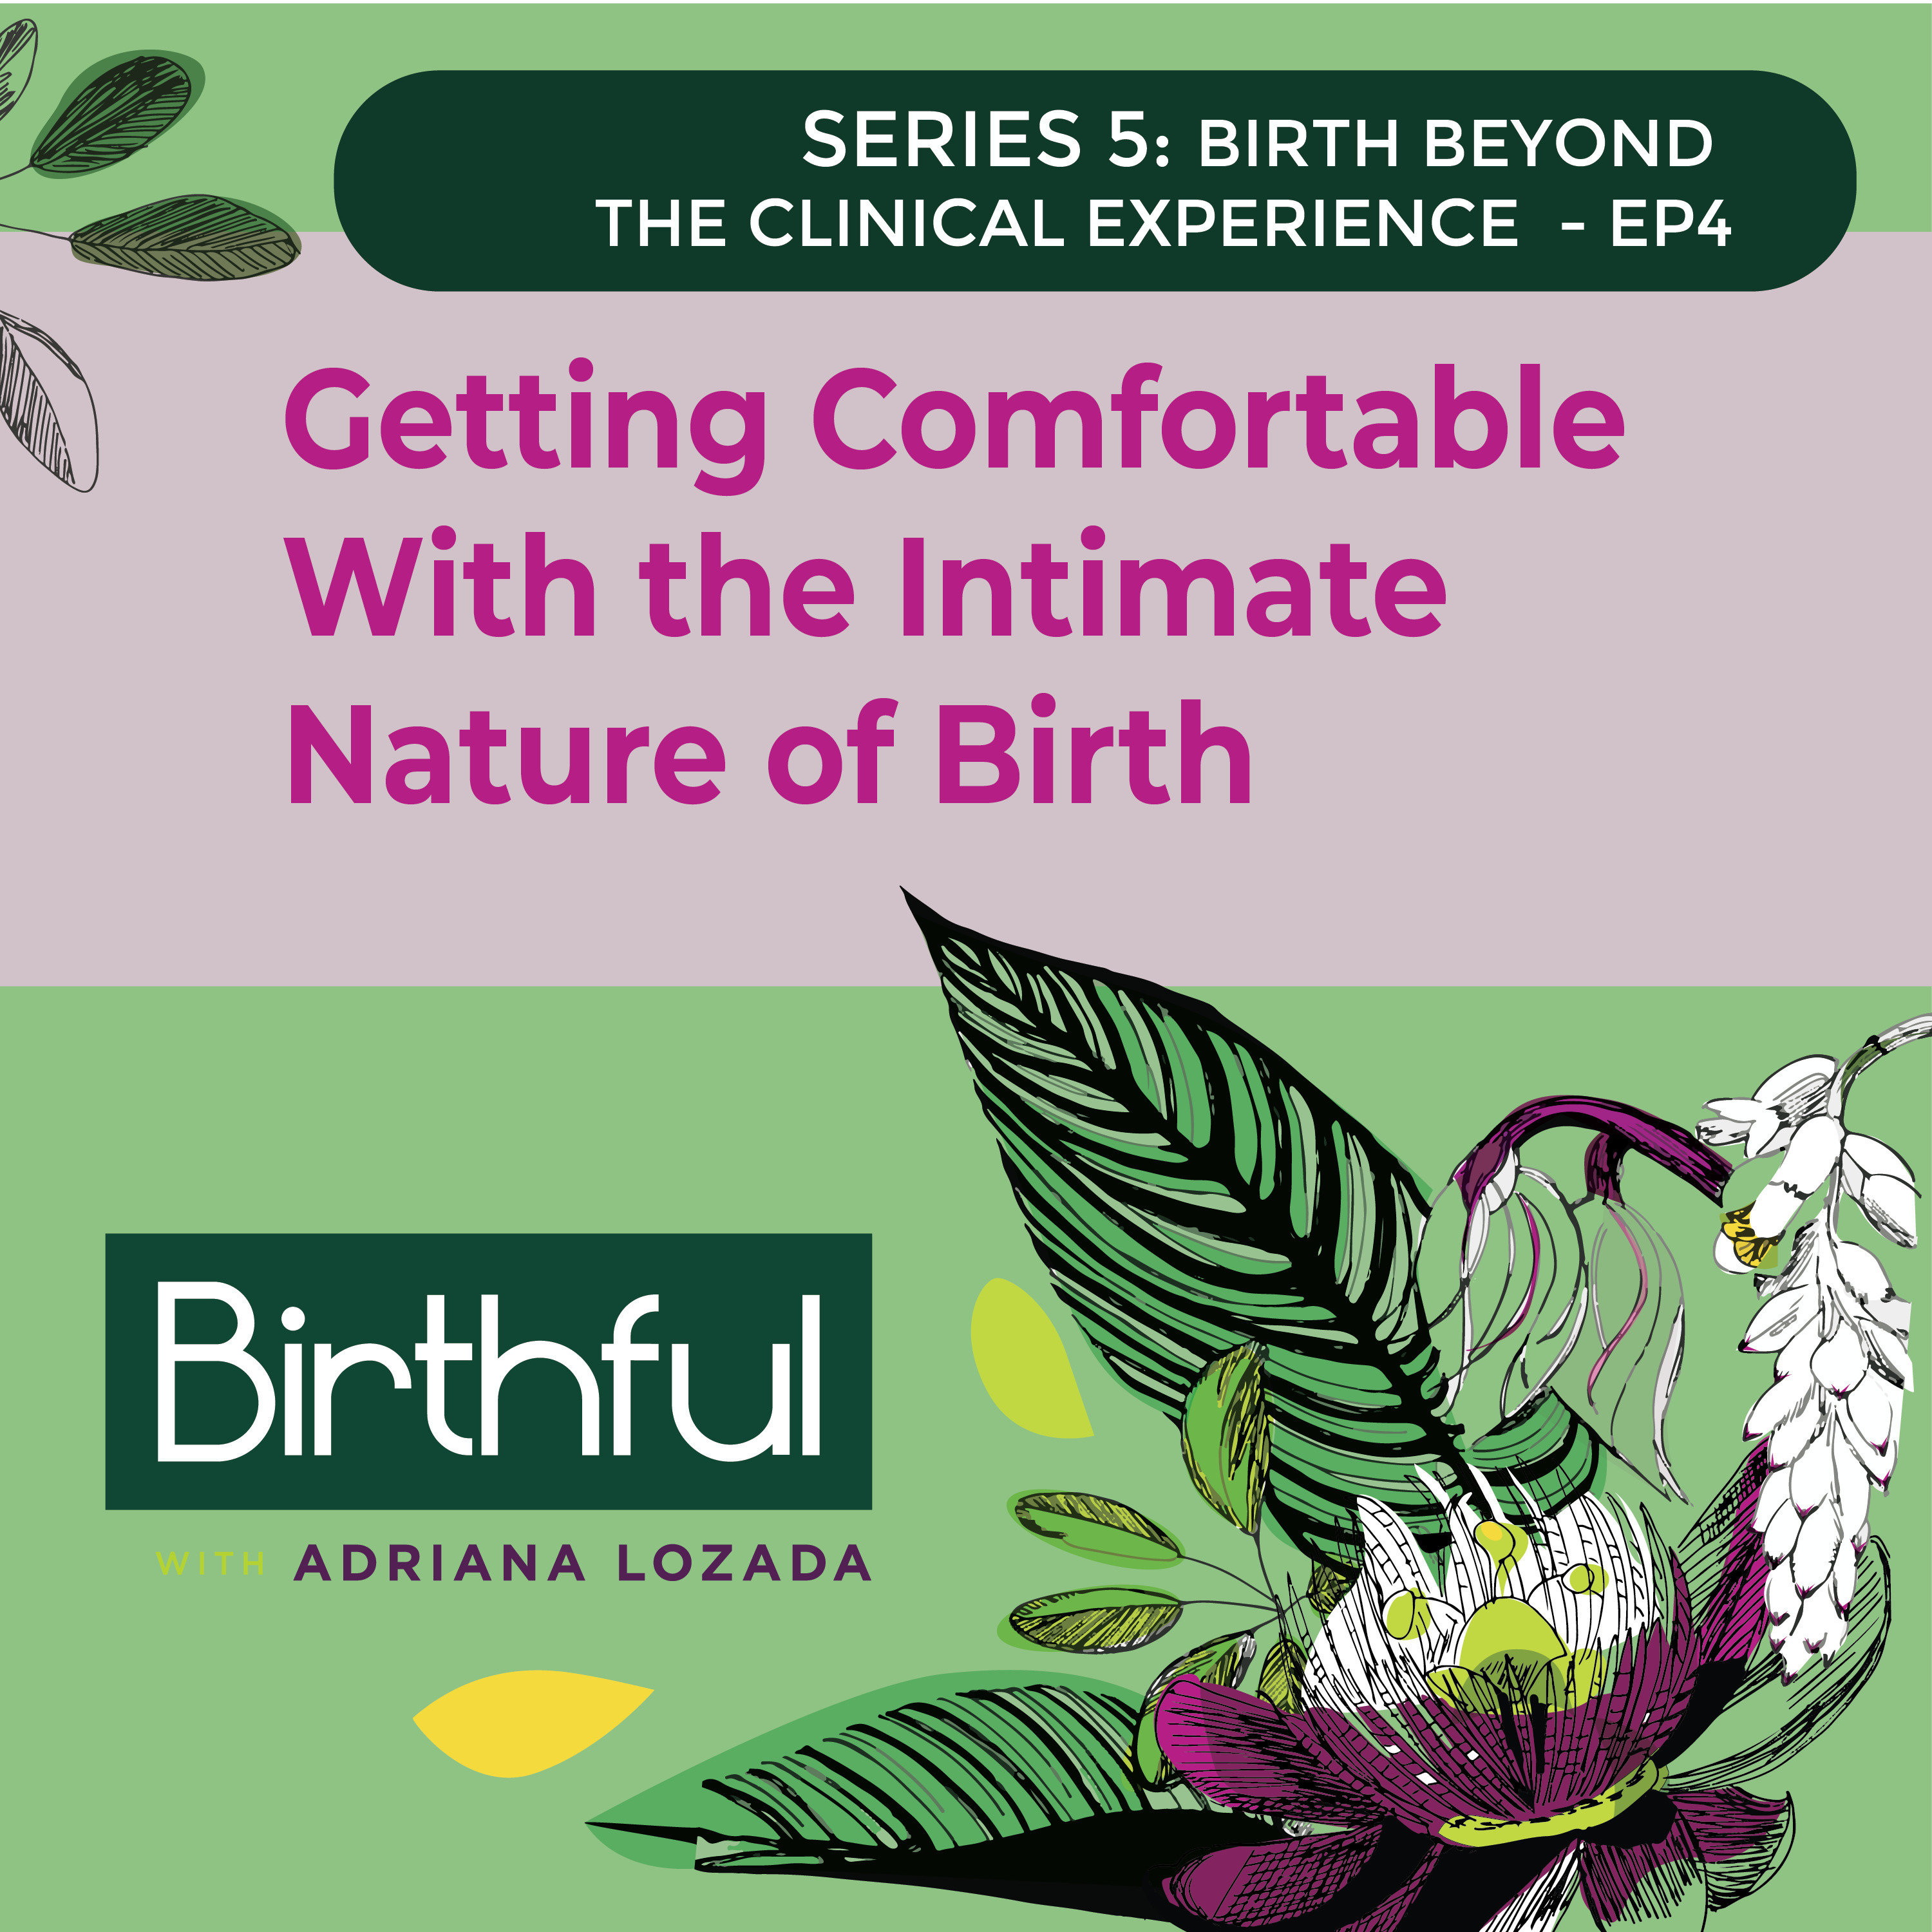 Getting Comfortable With the Intimate Nature of Birth